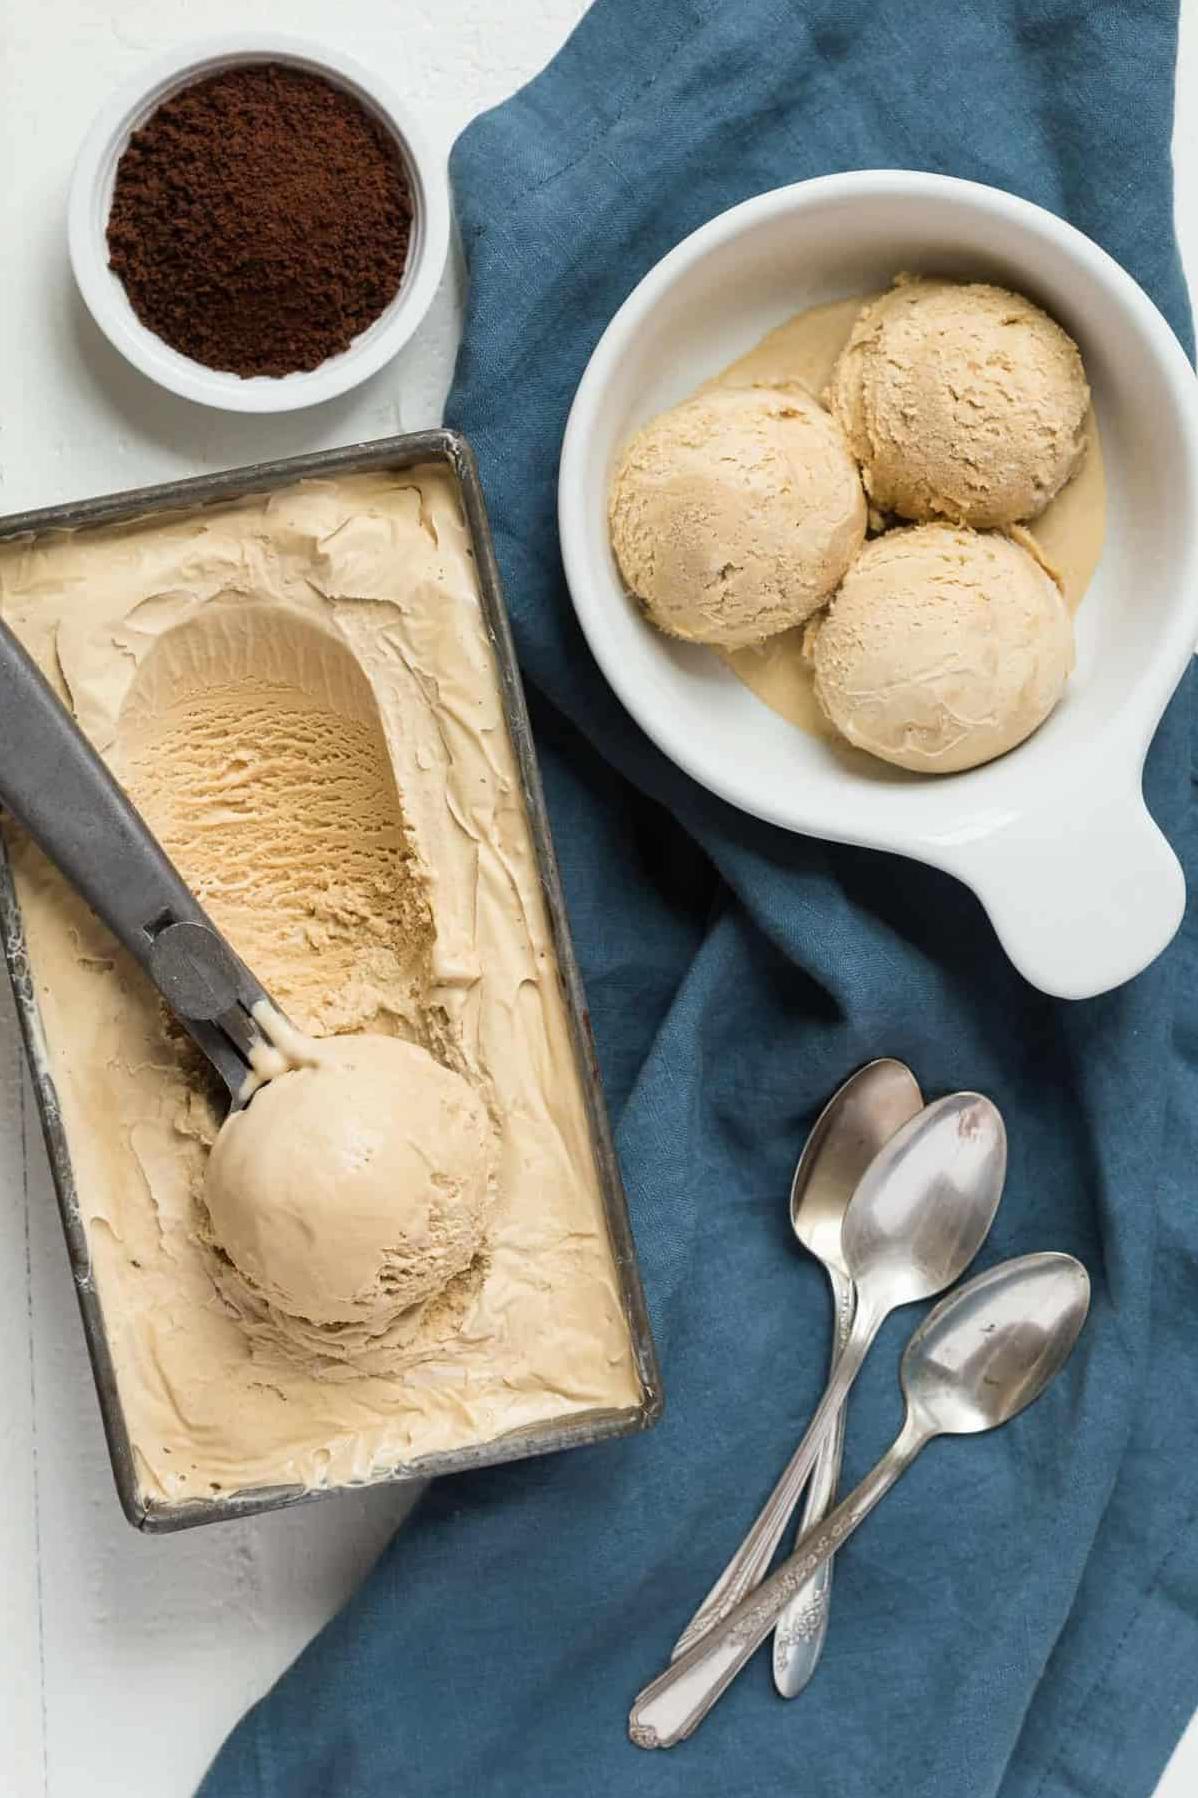  Whip up a batch of our creamy coffee ice cream for your next BBQ.